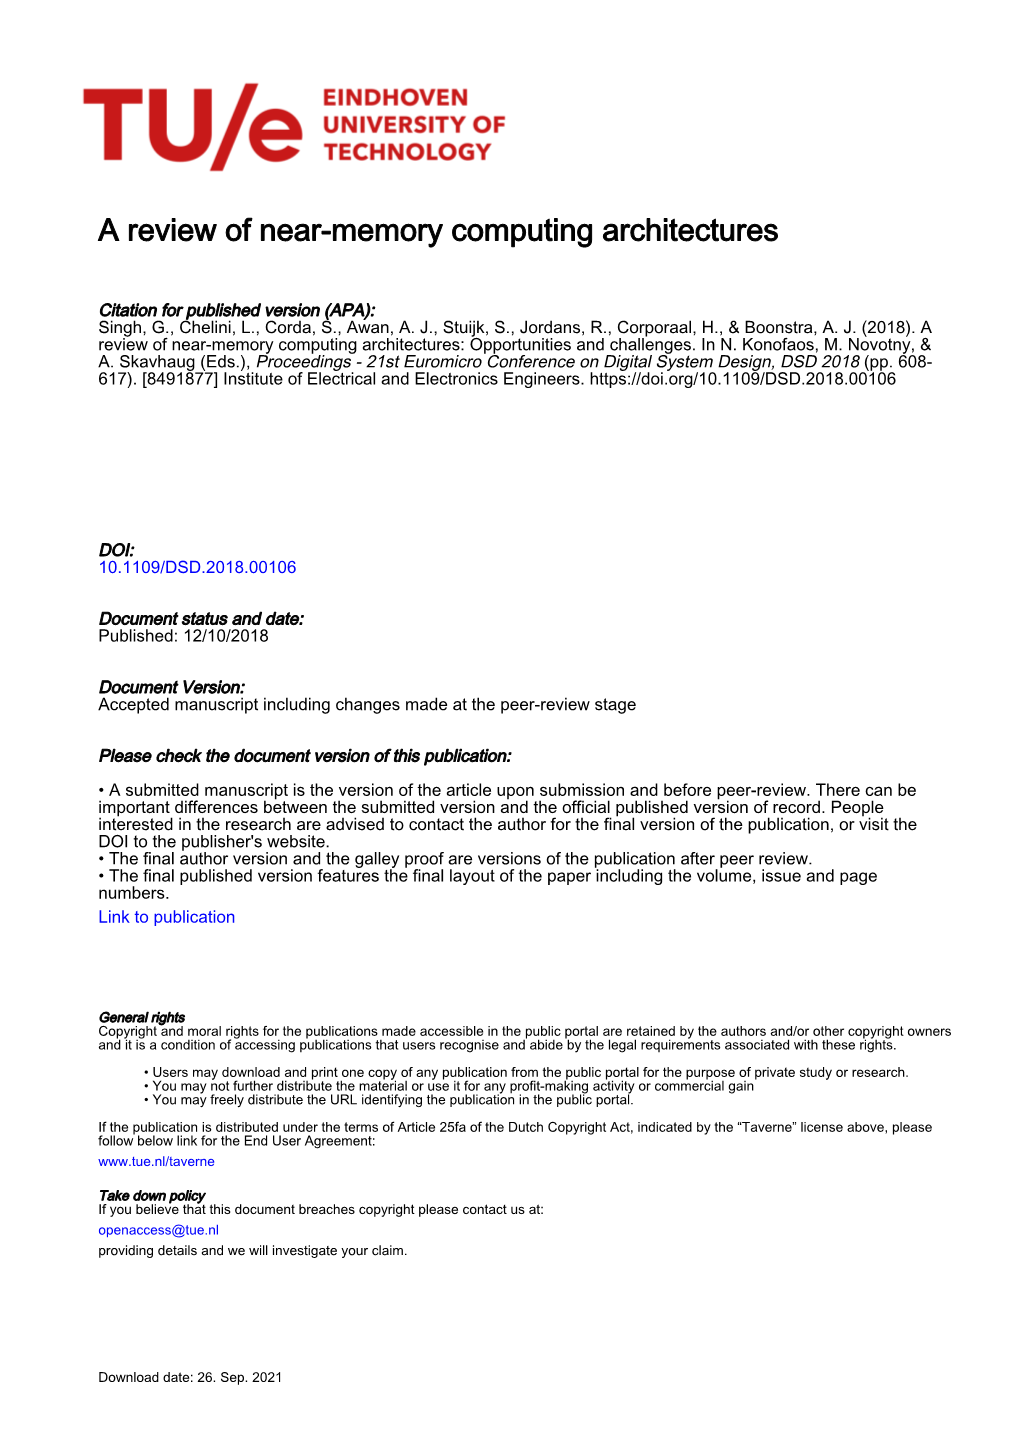 A Review of Near-Memory Computing Architectures